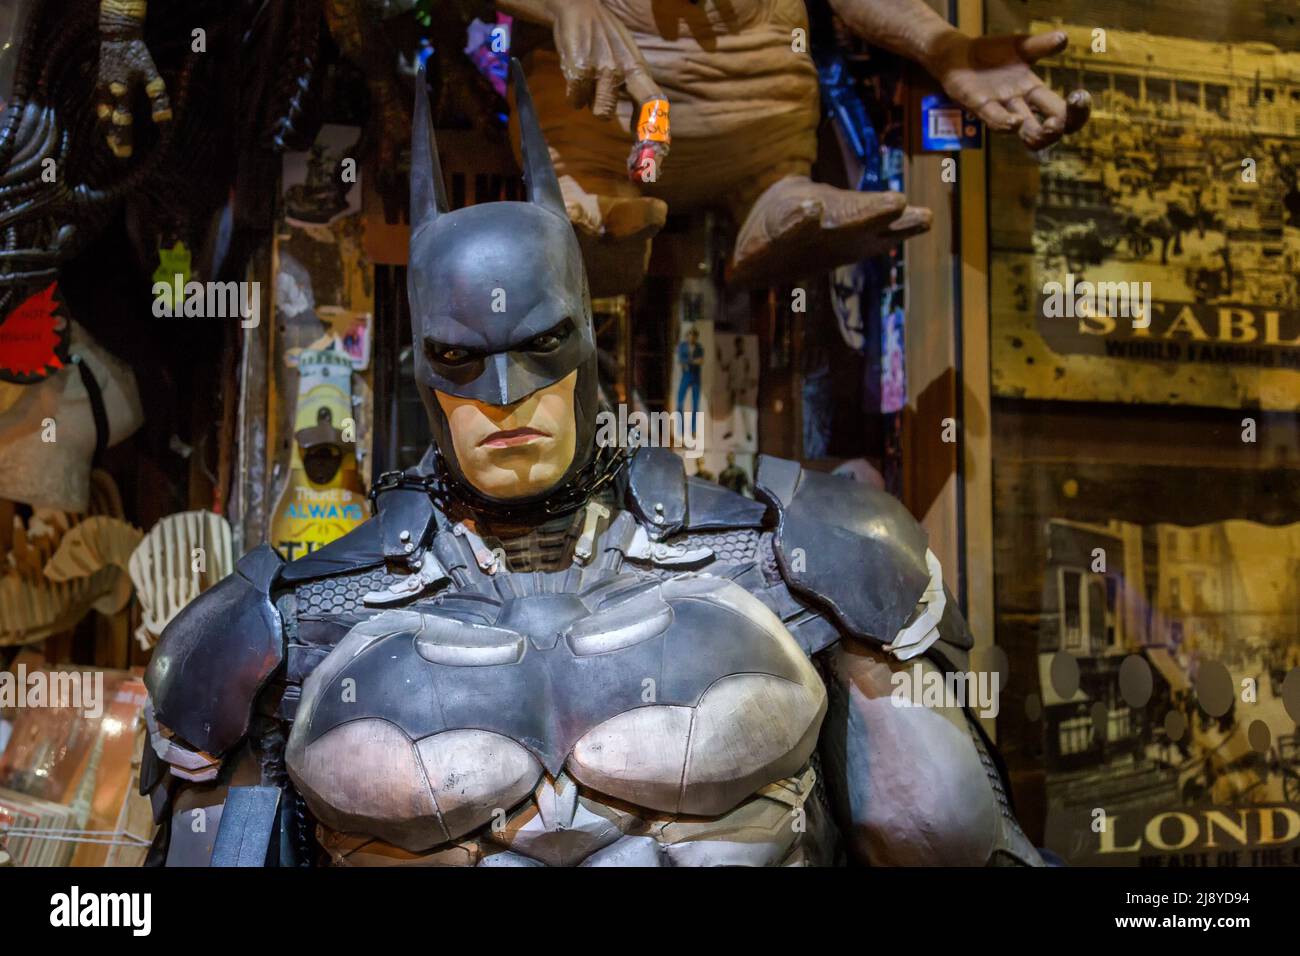 A life size mannequin of Batman showing off his muscular physique. Perhaps offering conceptual use for fitness, diet, masculinity, bodybuilding etc. Stock Photo